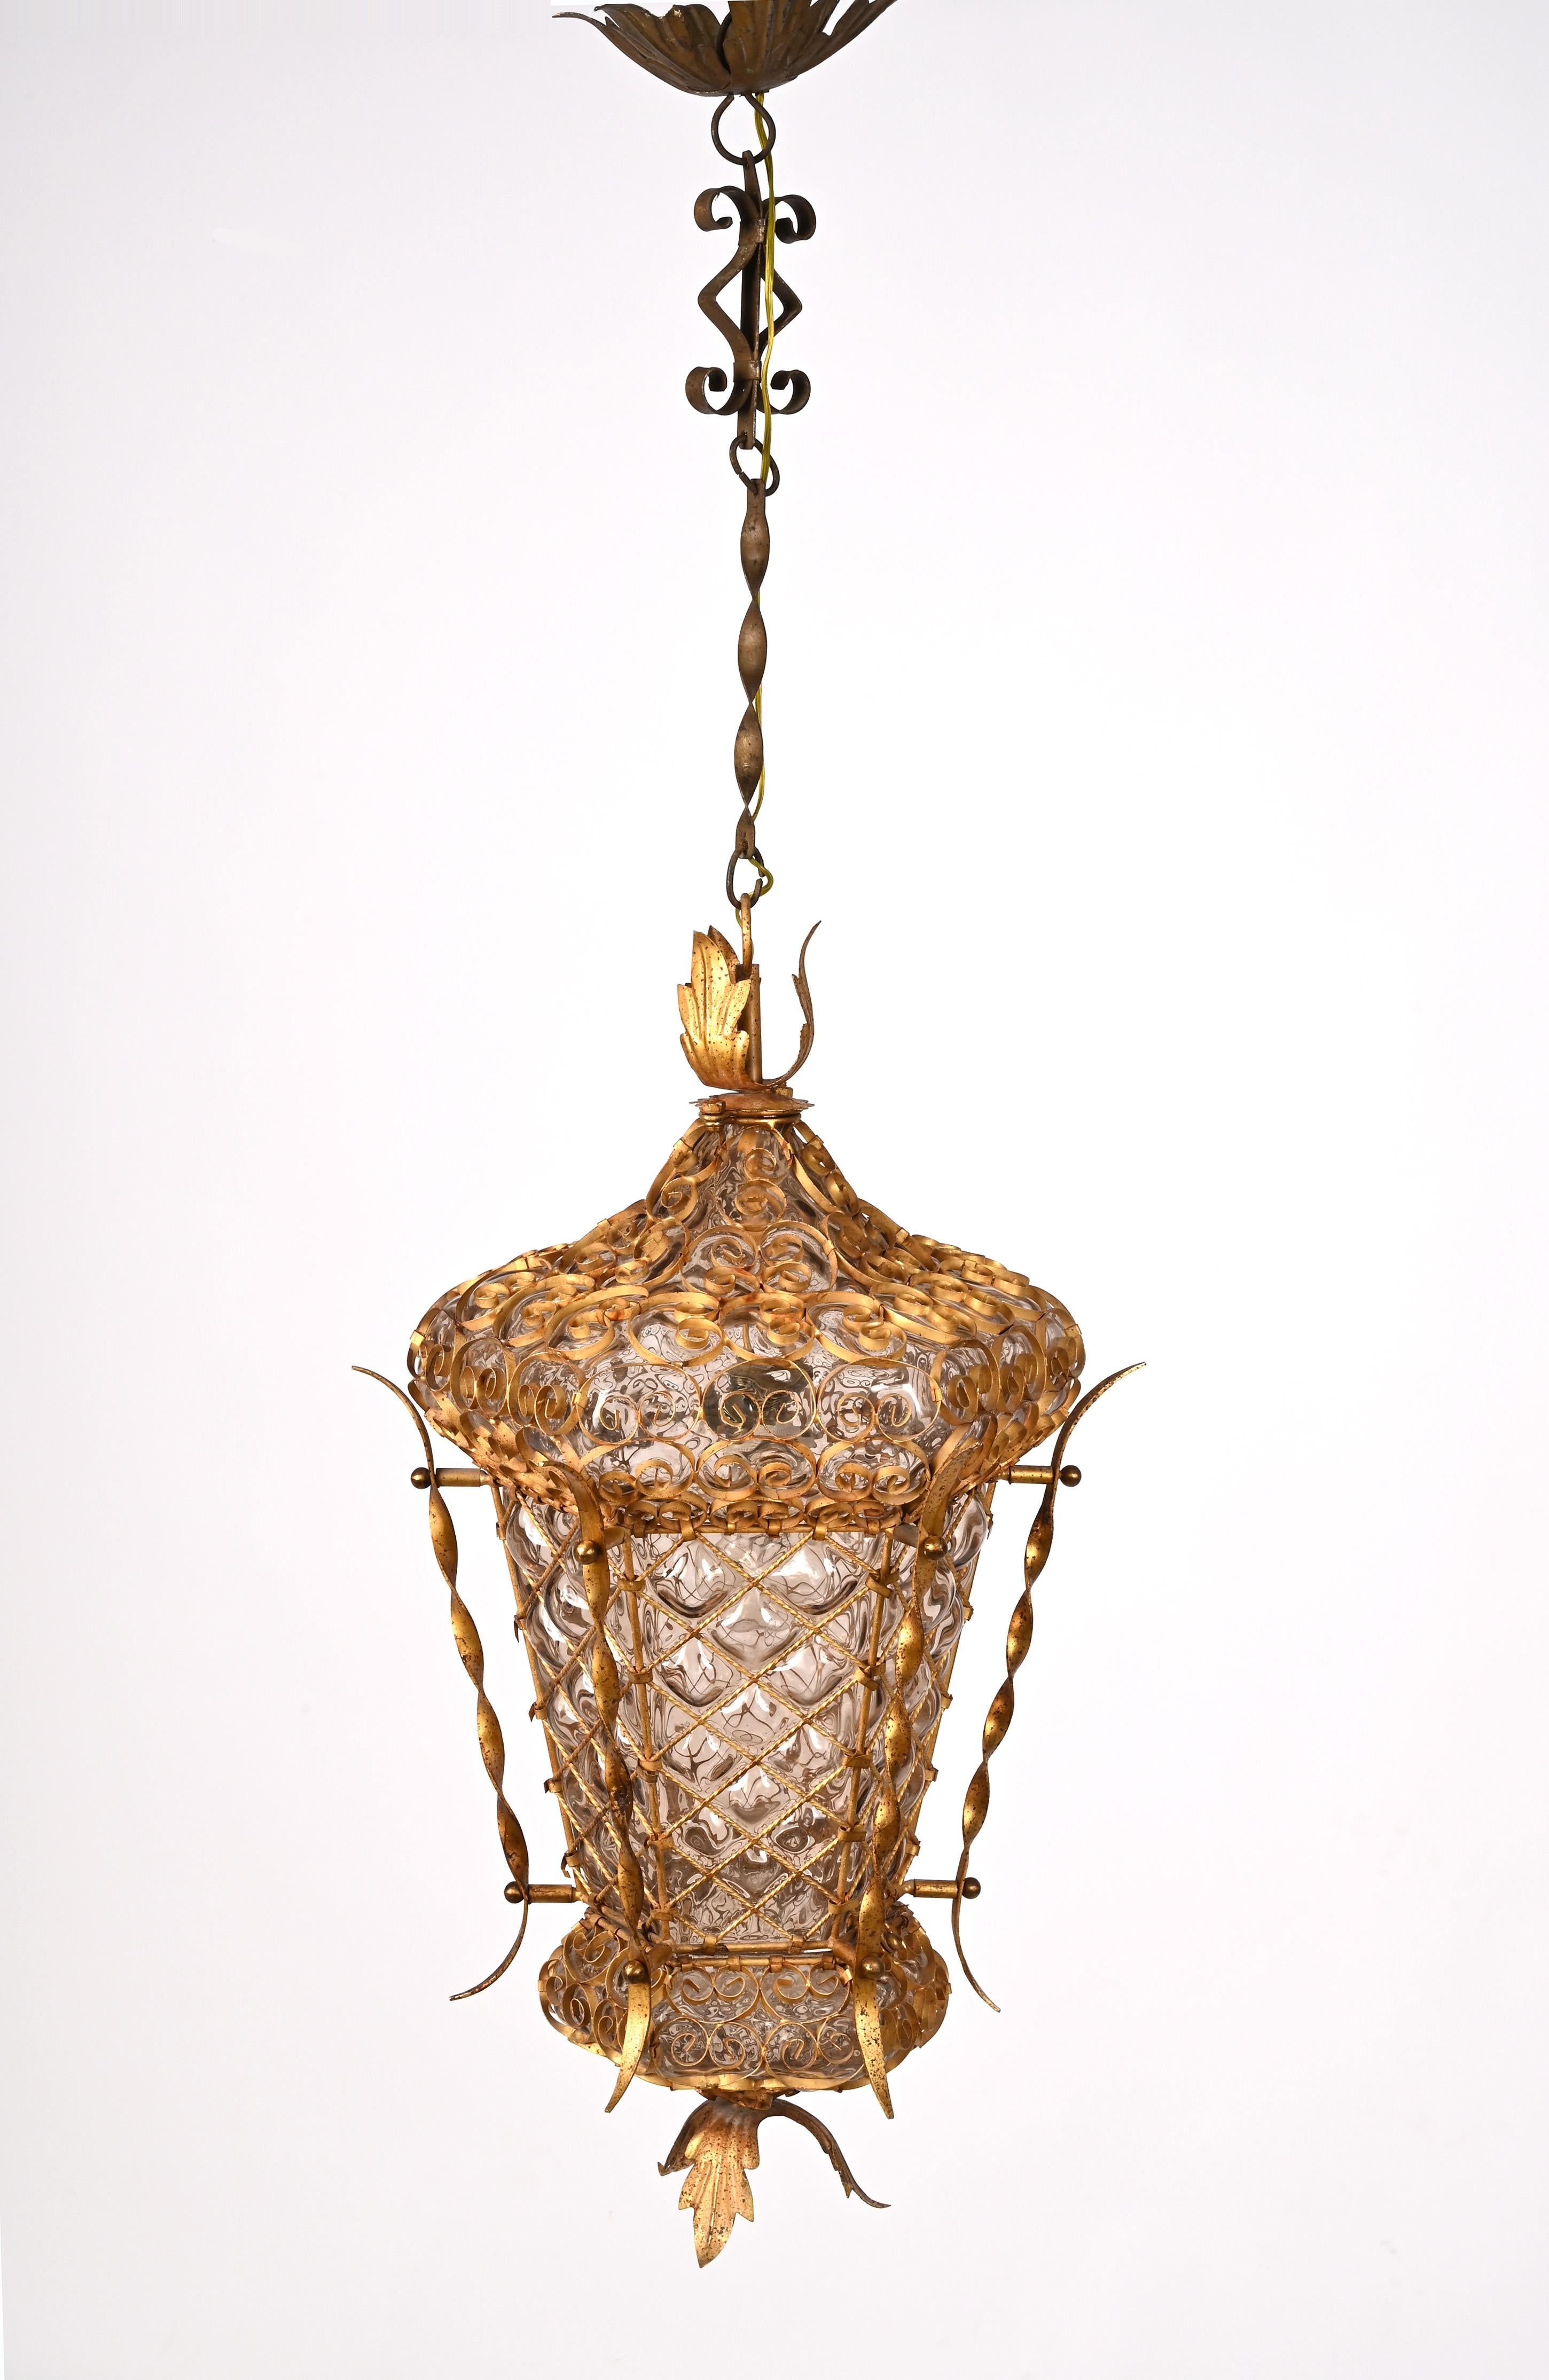 Art Glass Midcentury Venetian Mouth Blown Glass in Gold Painted Metal Frame Lantern, 1940s For Sale